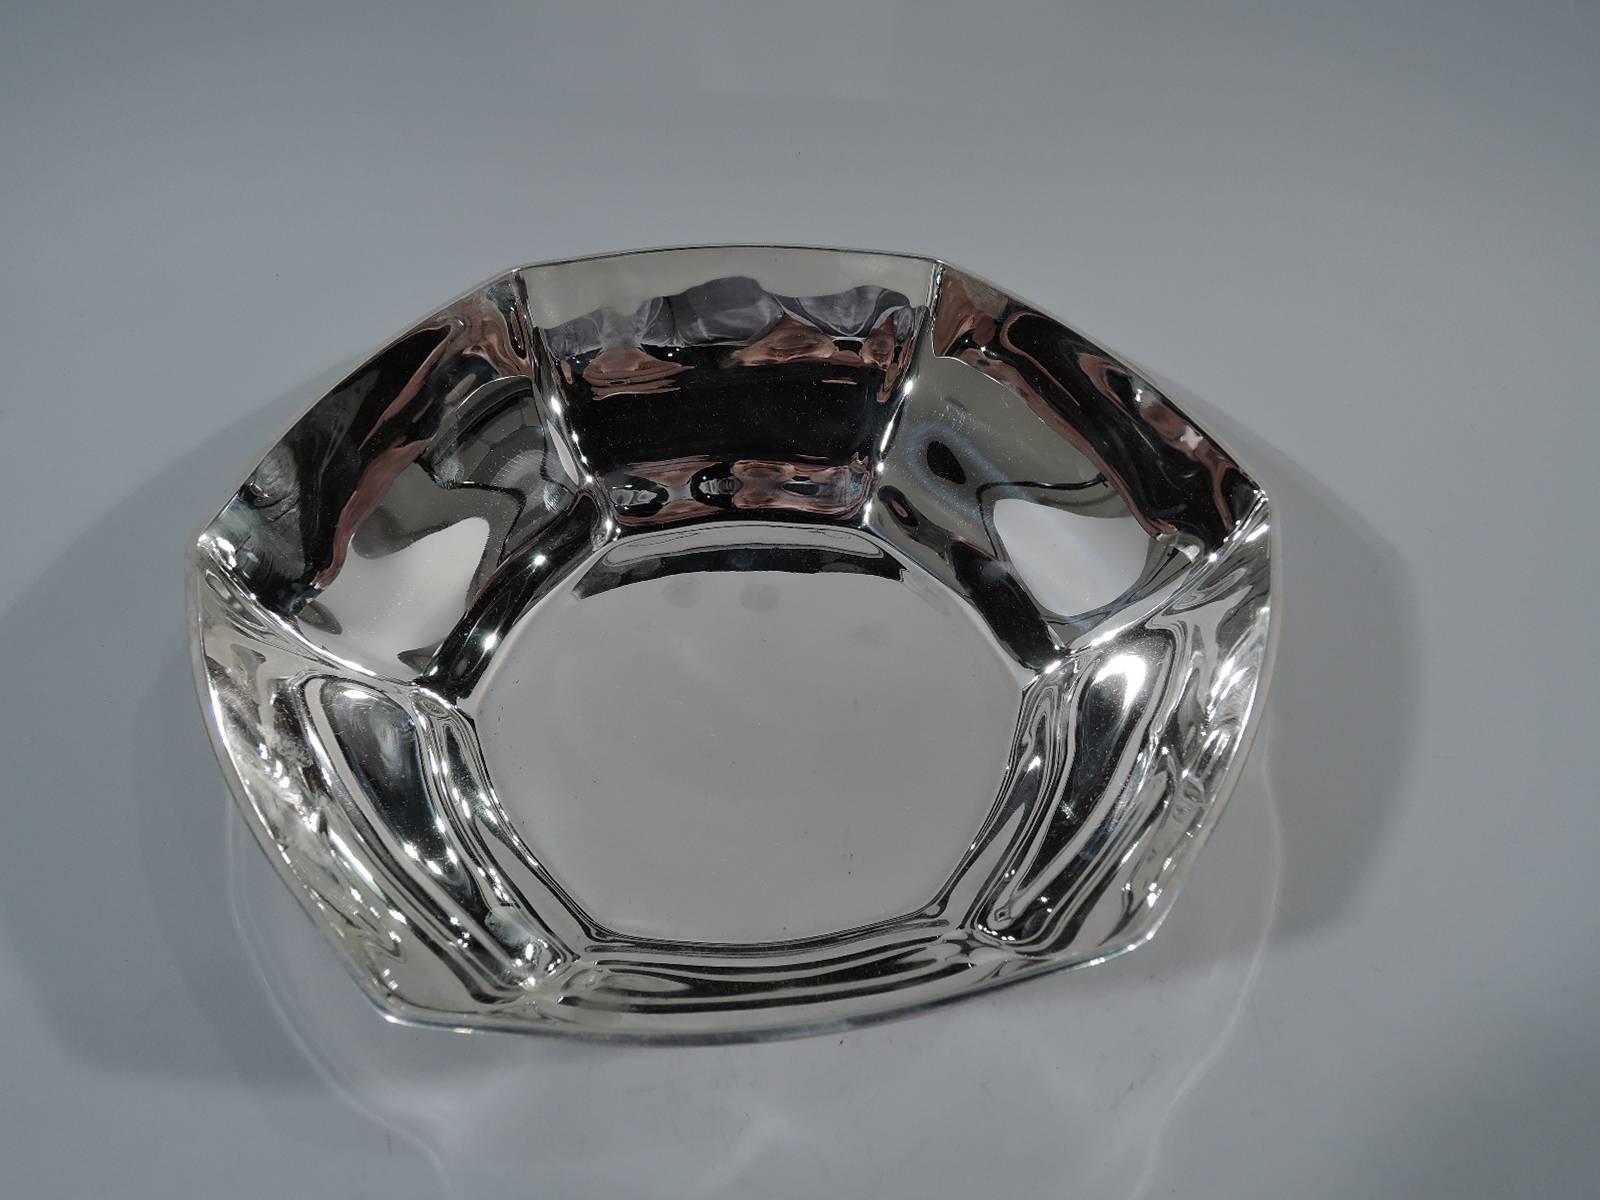 Art Deco sterling silver bowl. Made by Tiffany & Co. in New York, circa 1911. Hexagonal with curved and tapering sides and reeded rim. A softened version of the geometric style. Hallmark includes pattern no. 18165 (first produced in 1911) and